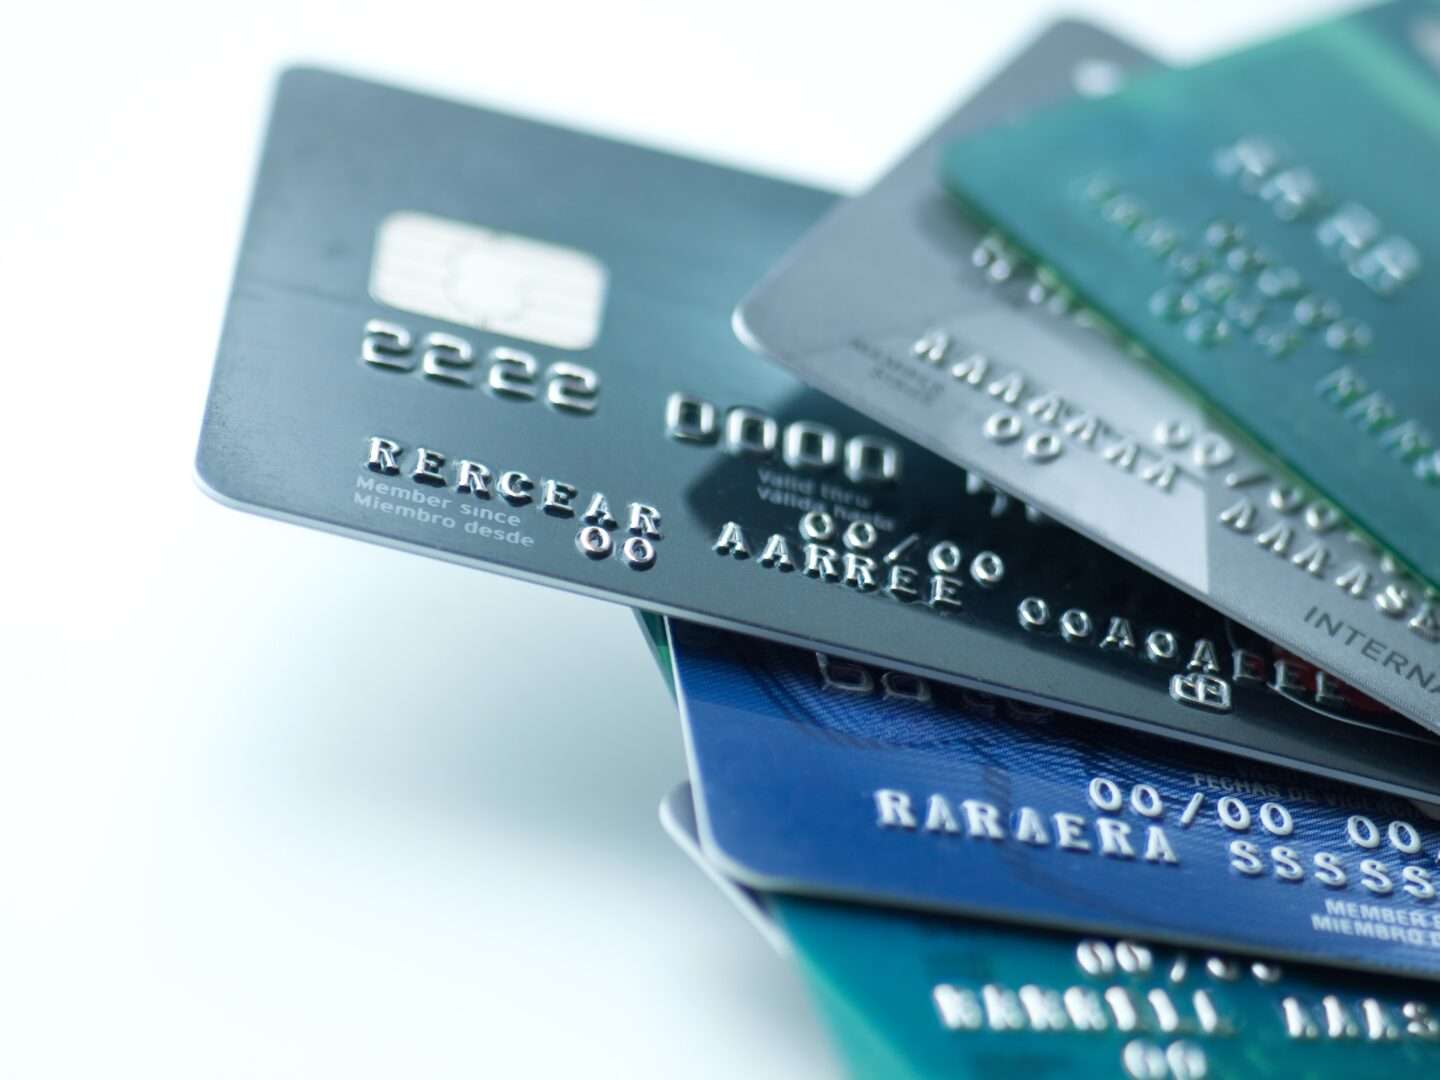 image of credit cards
